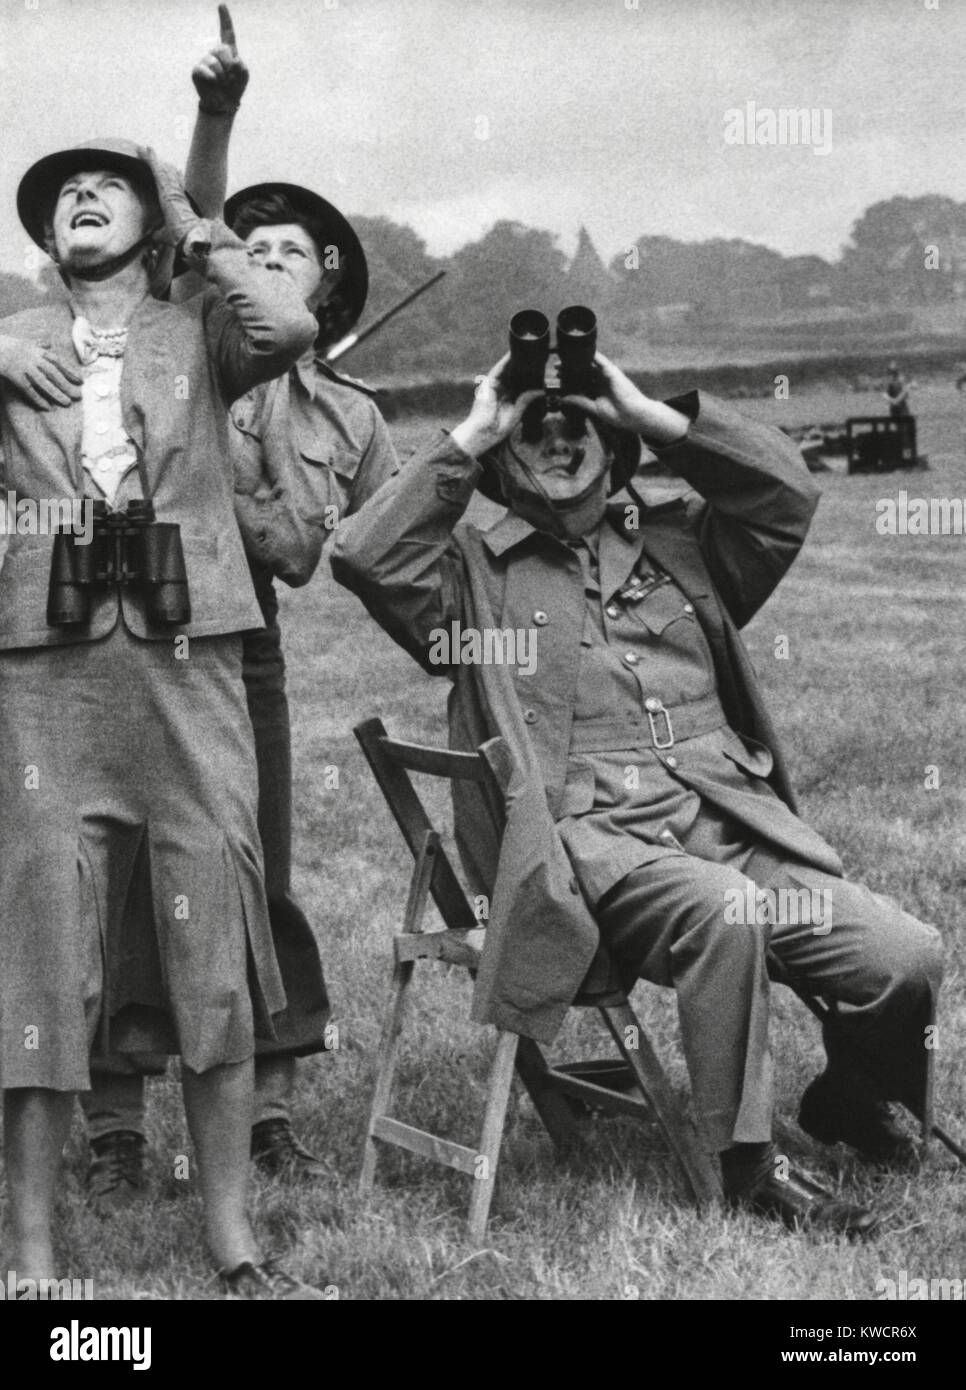 Prime Minister and Mrs. Churchill watching a fighter intercept a German 'buzz bomb' overhead. With them is their daughter, Subaltern Mary Churchill, an officer at the mixed battery in Southern England to defend against the 'Flying Bomb'. Churchill is wearing the Uniform of Honorary Colonel of the 5th Cinque Ports, Battalion Royal Sussex Regiment. July 1, 1944. - (BSLOC 2014 17 37) Stock Photo